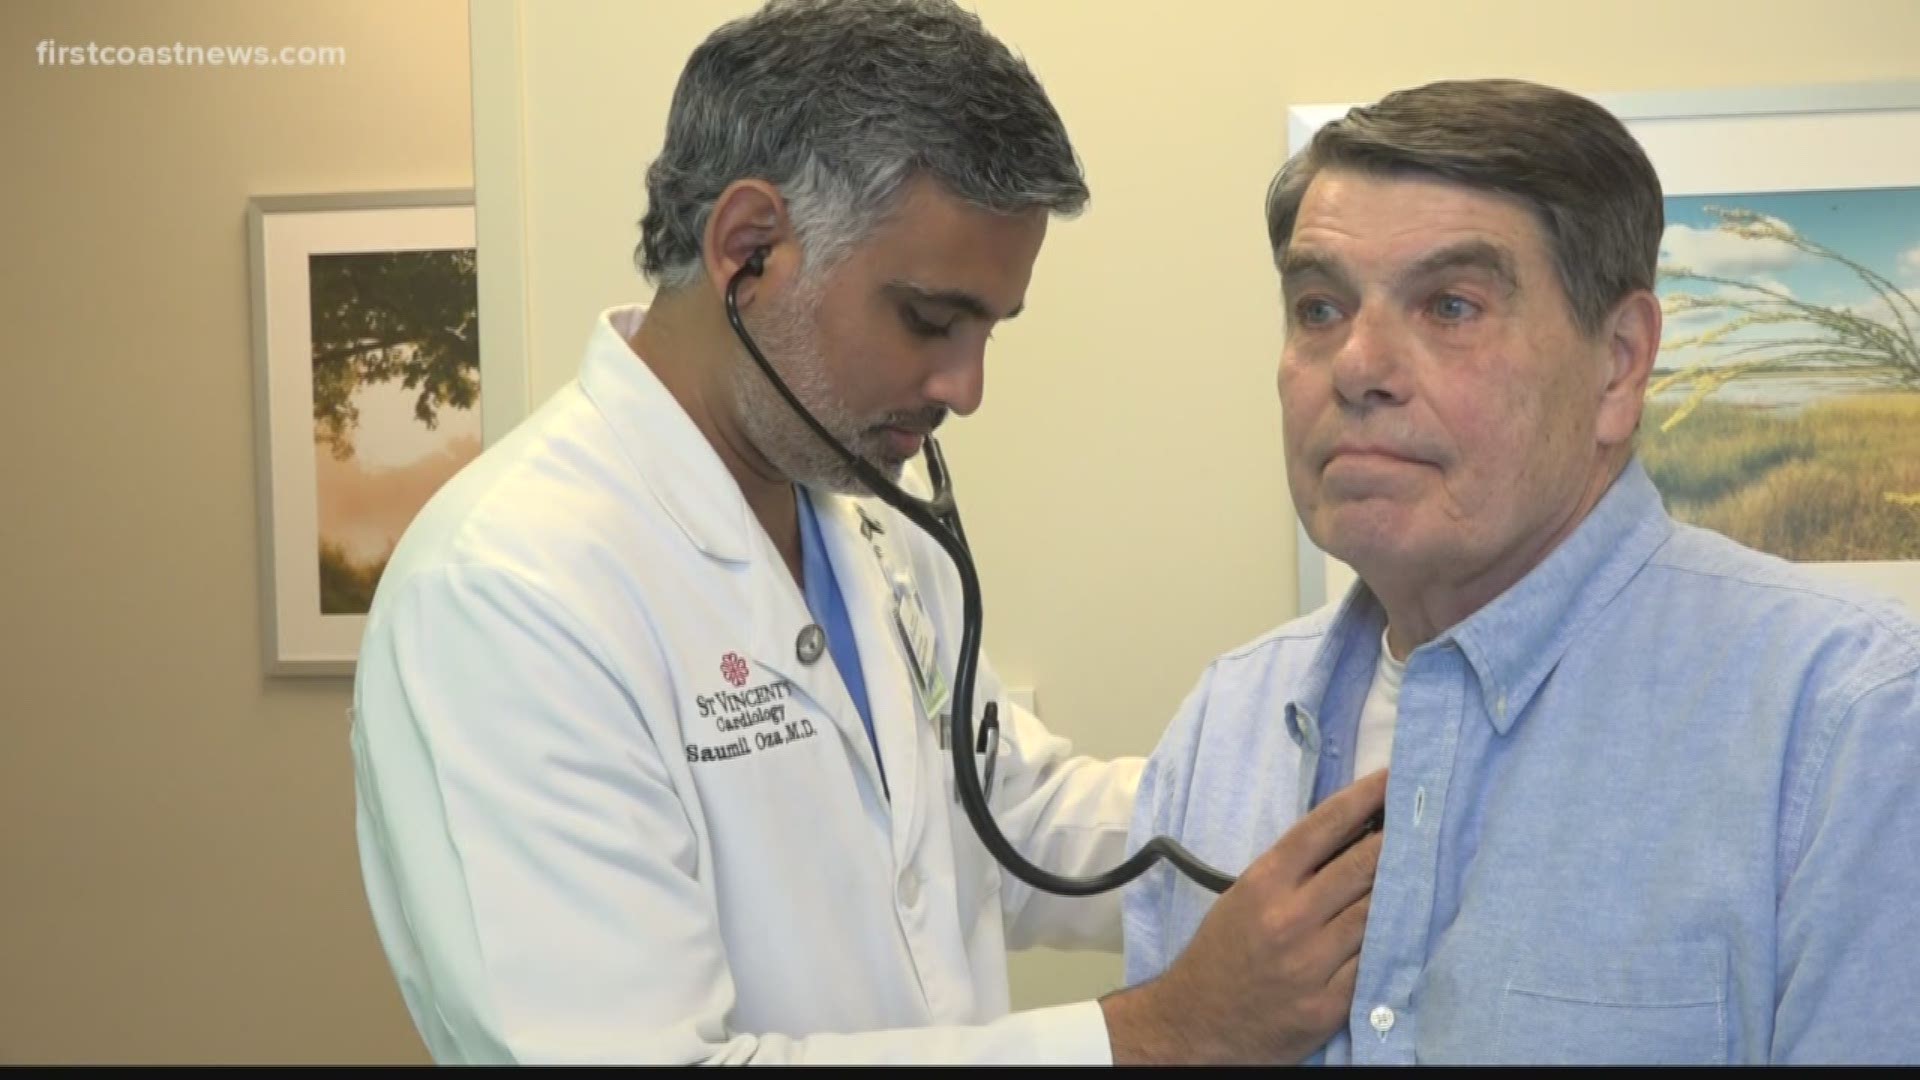 A breakthrough device known as a wireless pacemaker is now being tested in Jacksonville.